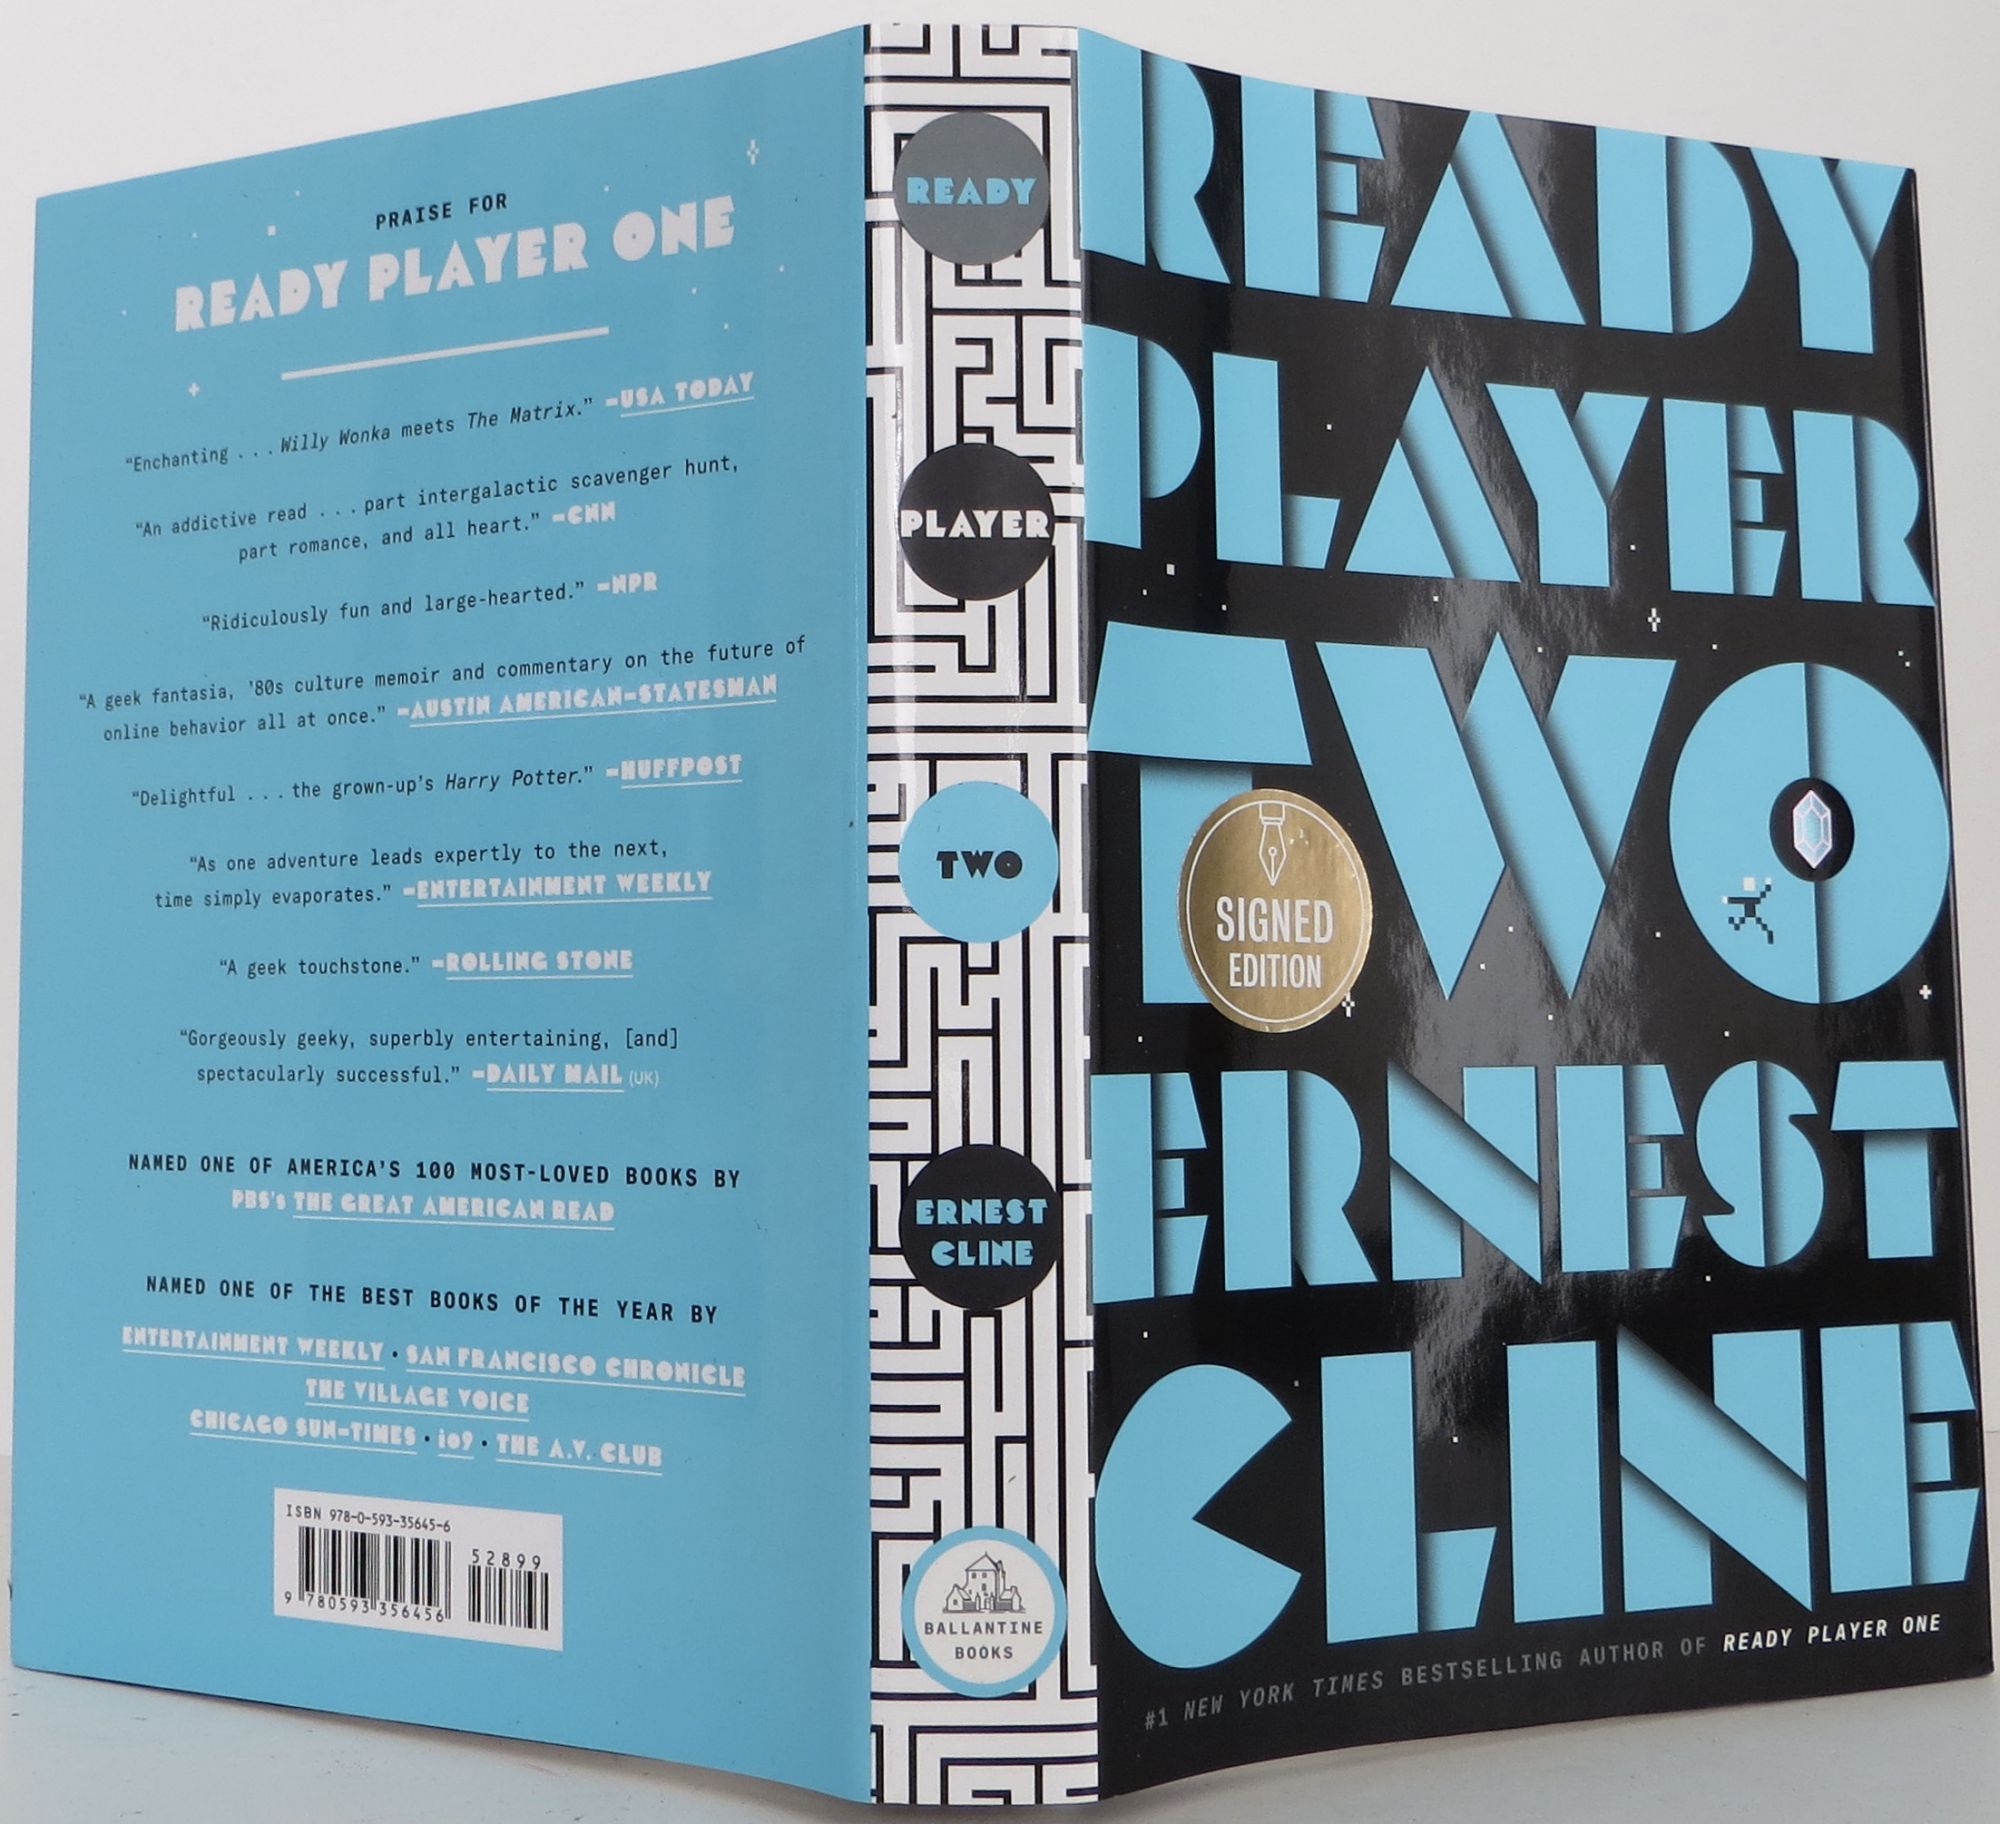 Goldsboro READY PLAYER ONE & TWO Signed ERNEST CLINE Number 1st Ed